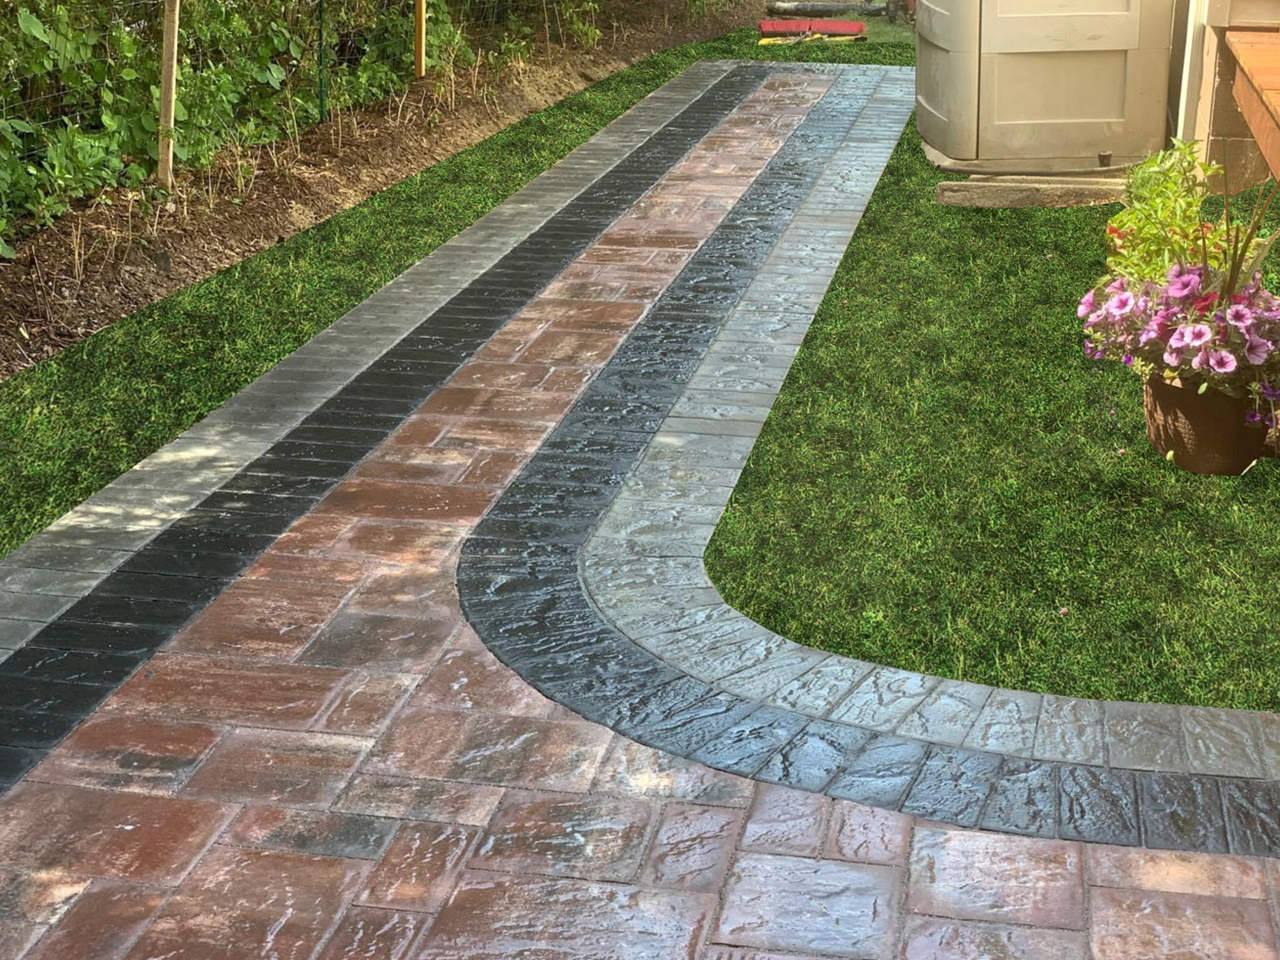 paver walkway installation. A transformed outdoor space with a professionally installed patio walkway by Affordable Patio, enhancing the overall aesthetic